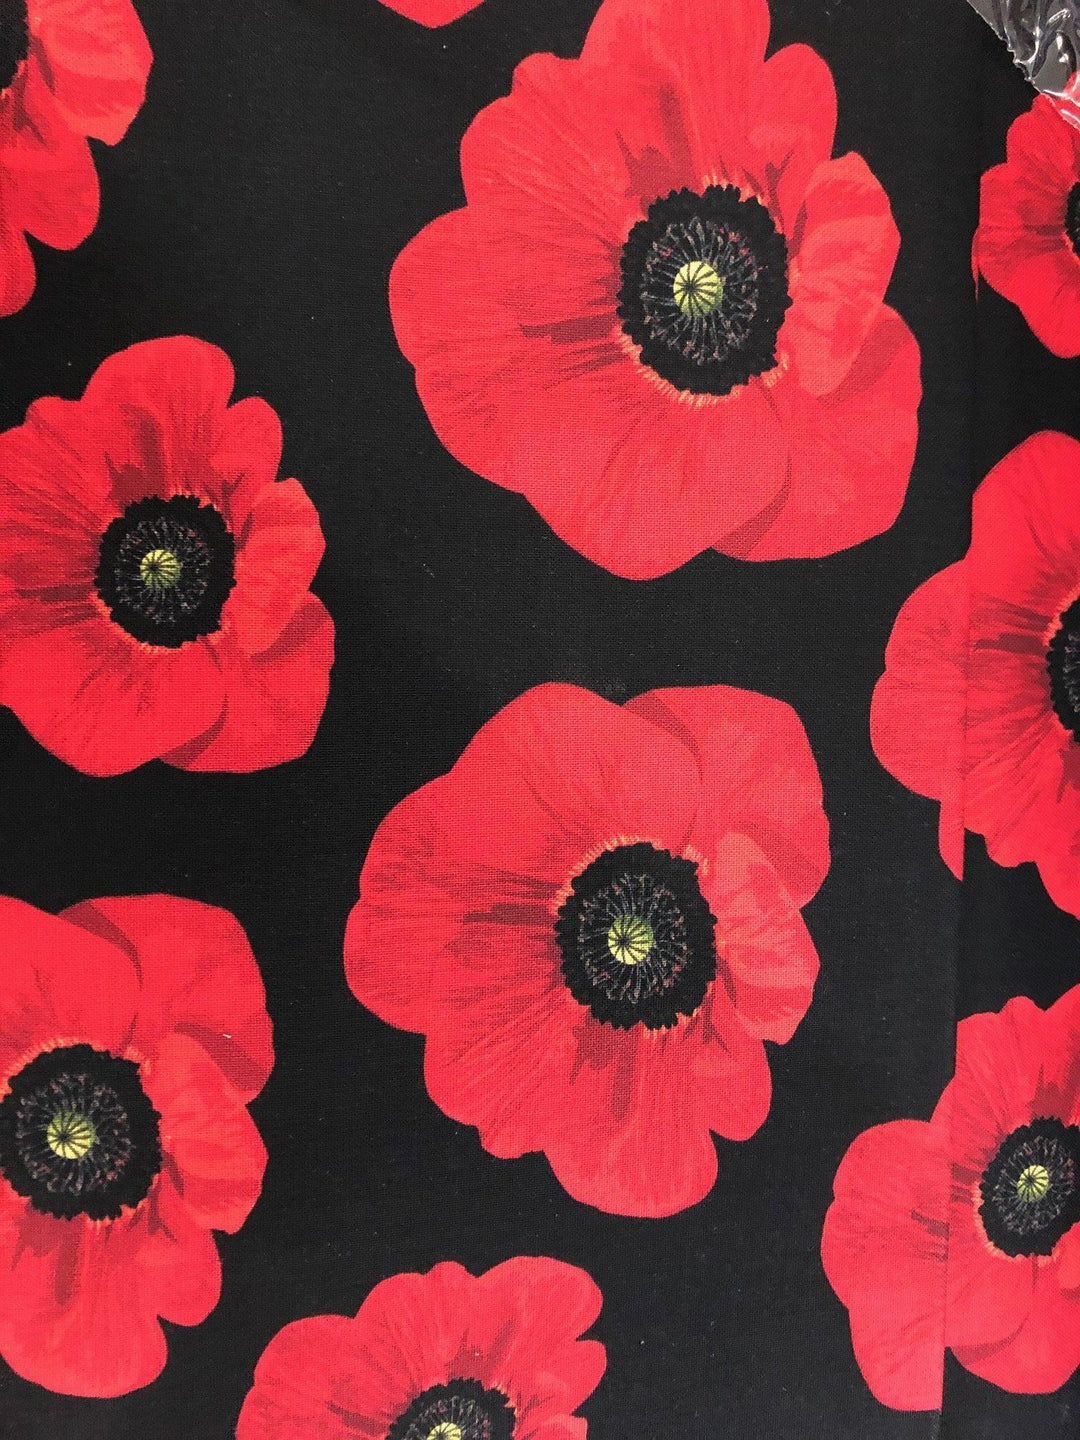 Poppies - Nana's Weighted Blankets